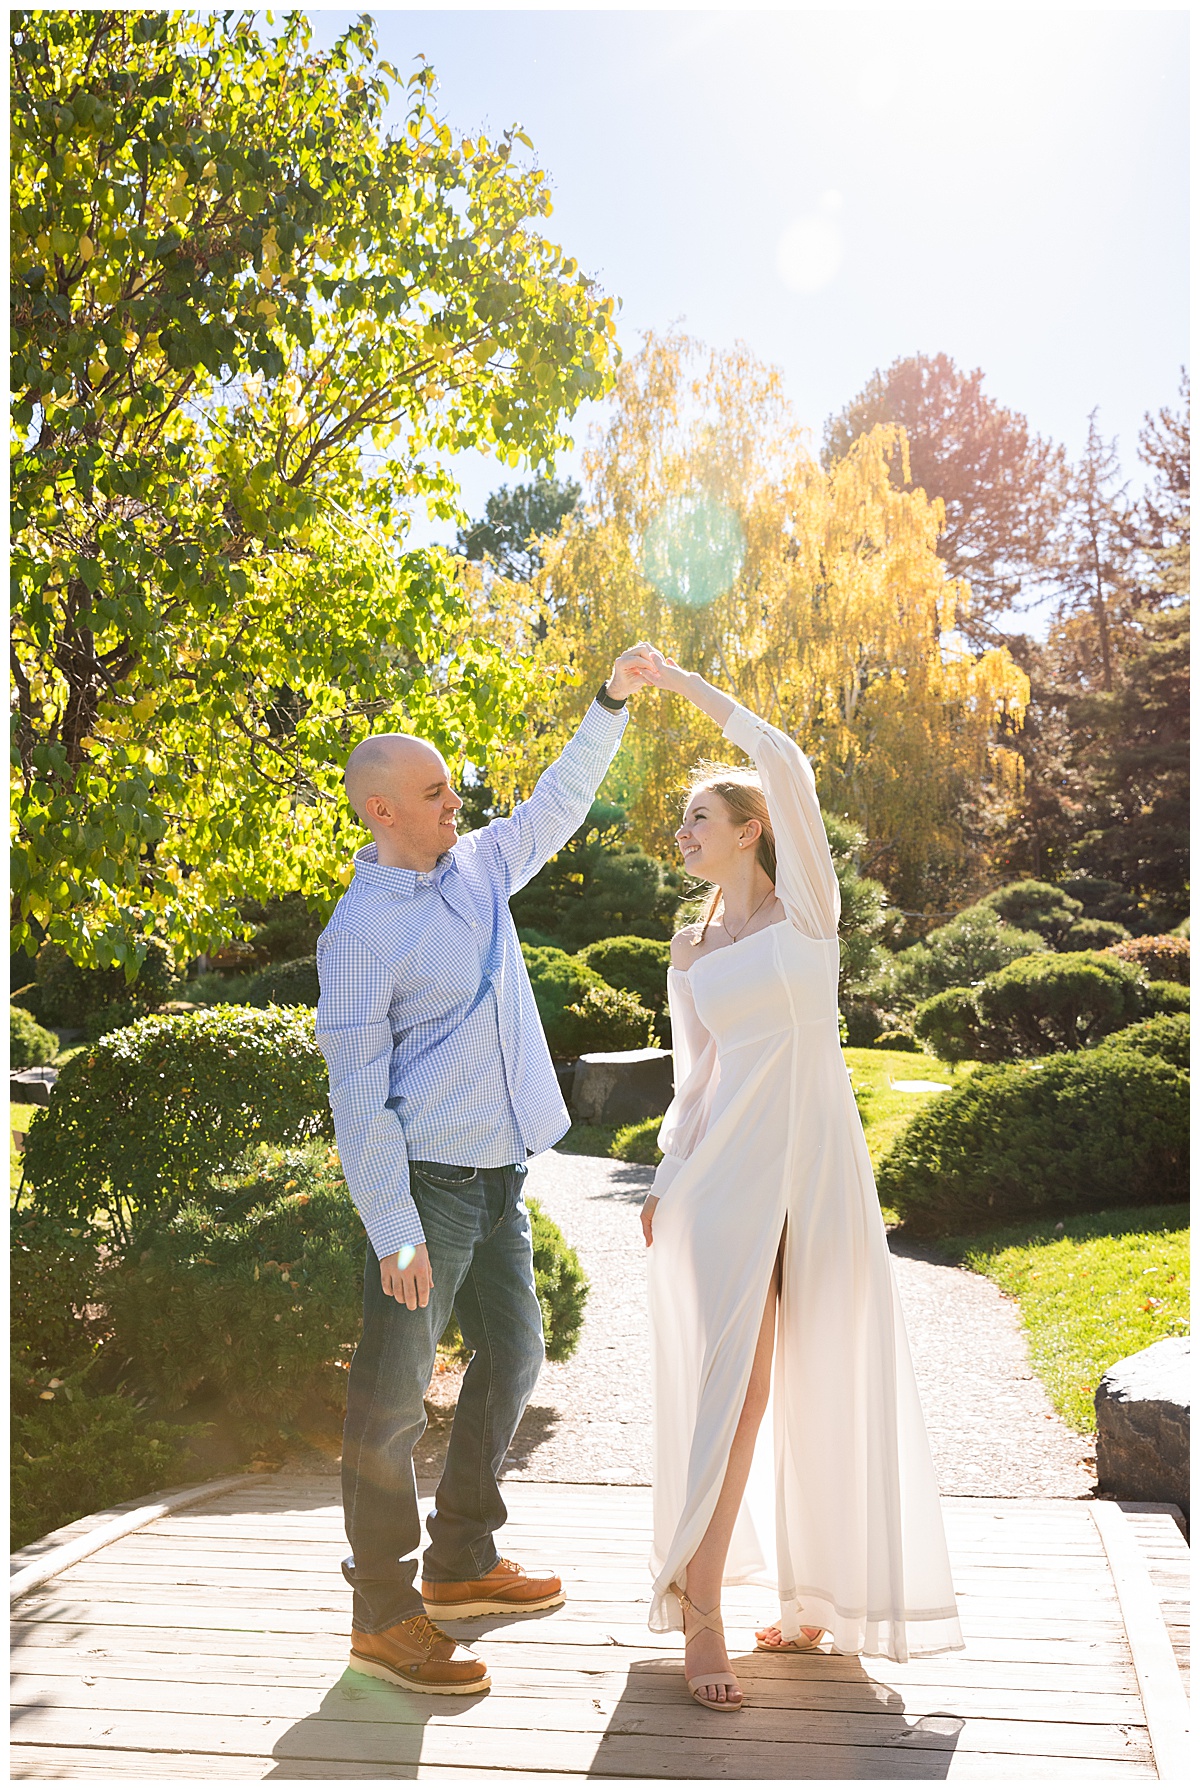 A couple dances on a pathway in front of trees and bushes during their engagement session. The man is spinning the woman. The man is wearing a blue checkered shirt and jeans. The woman is wearing a long white dress with long sleeves.